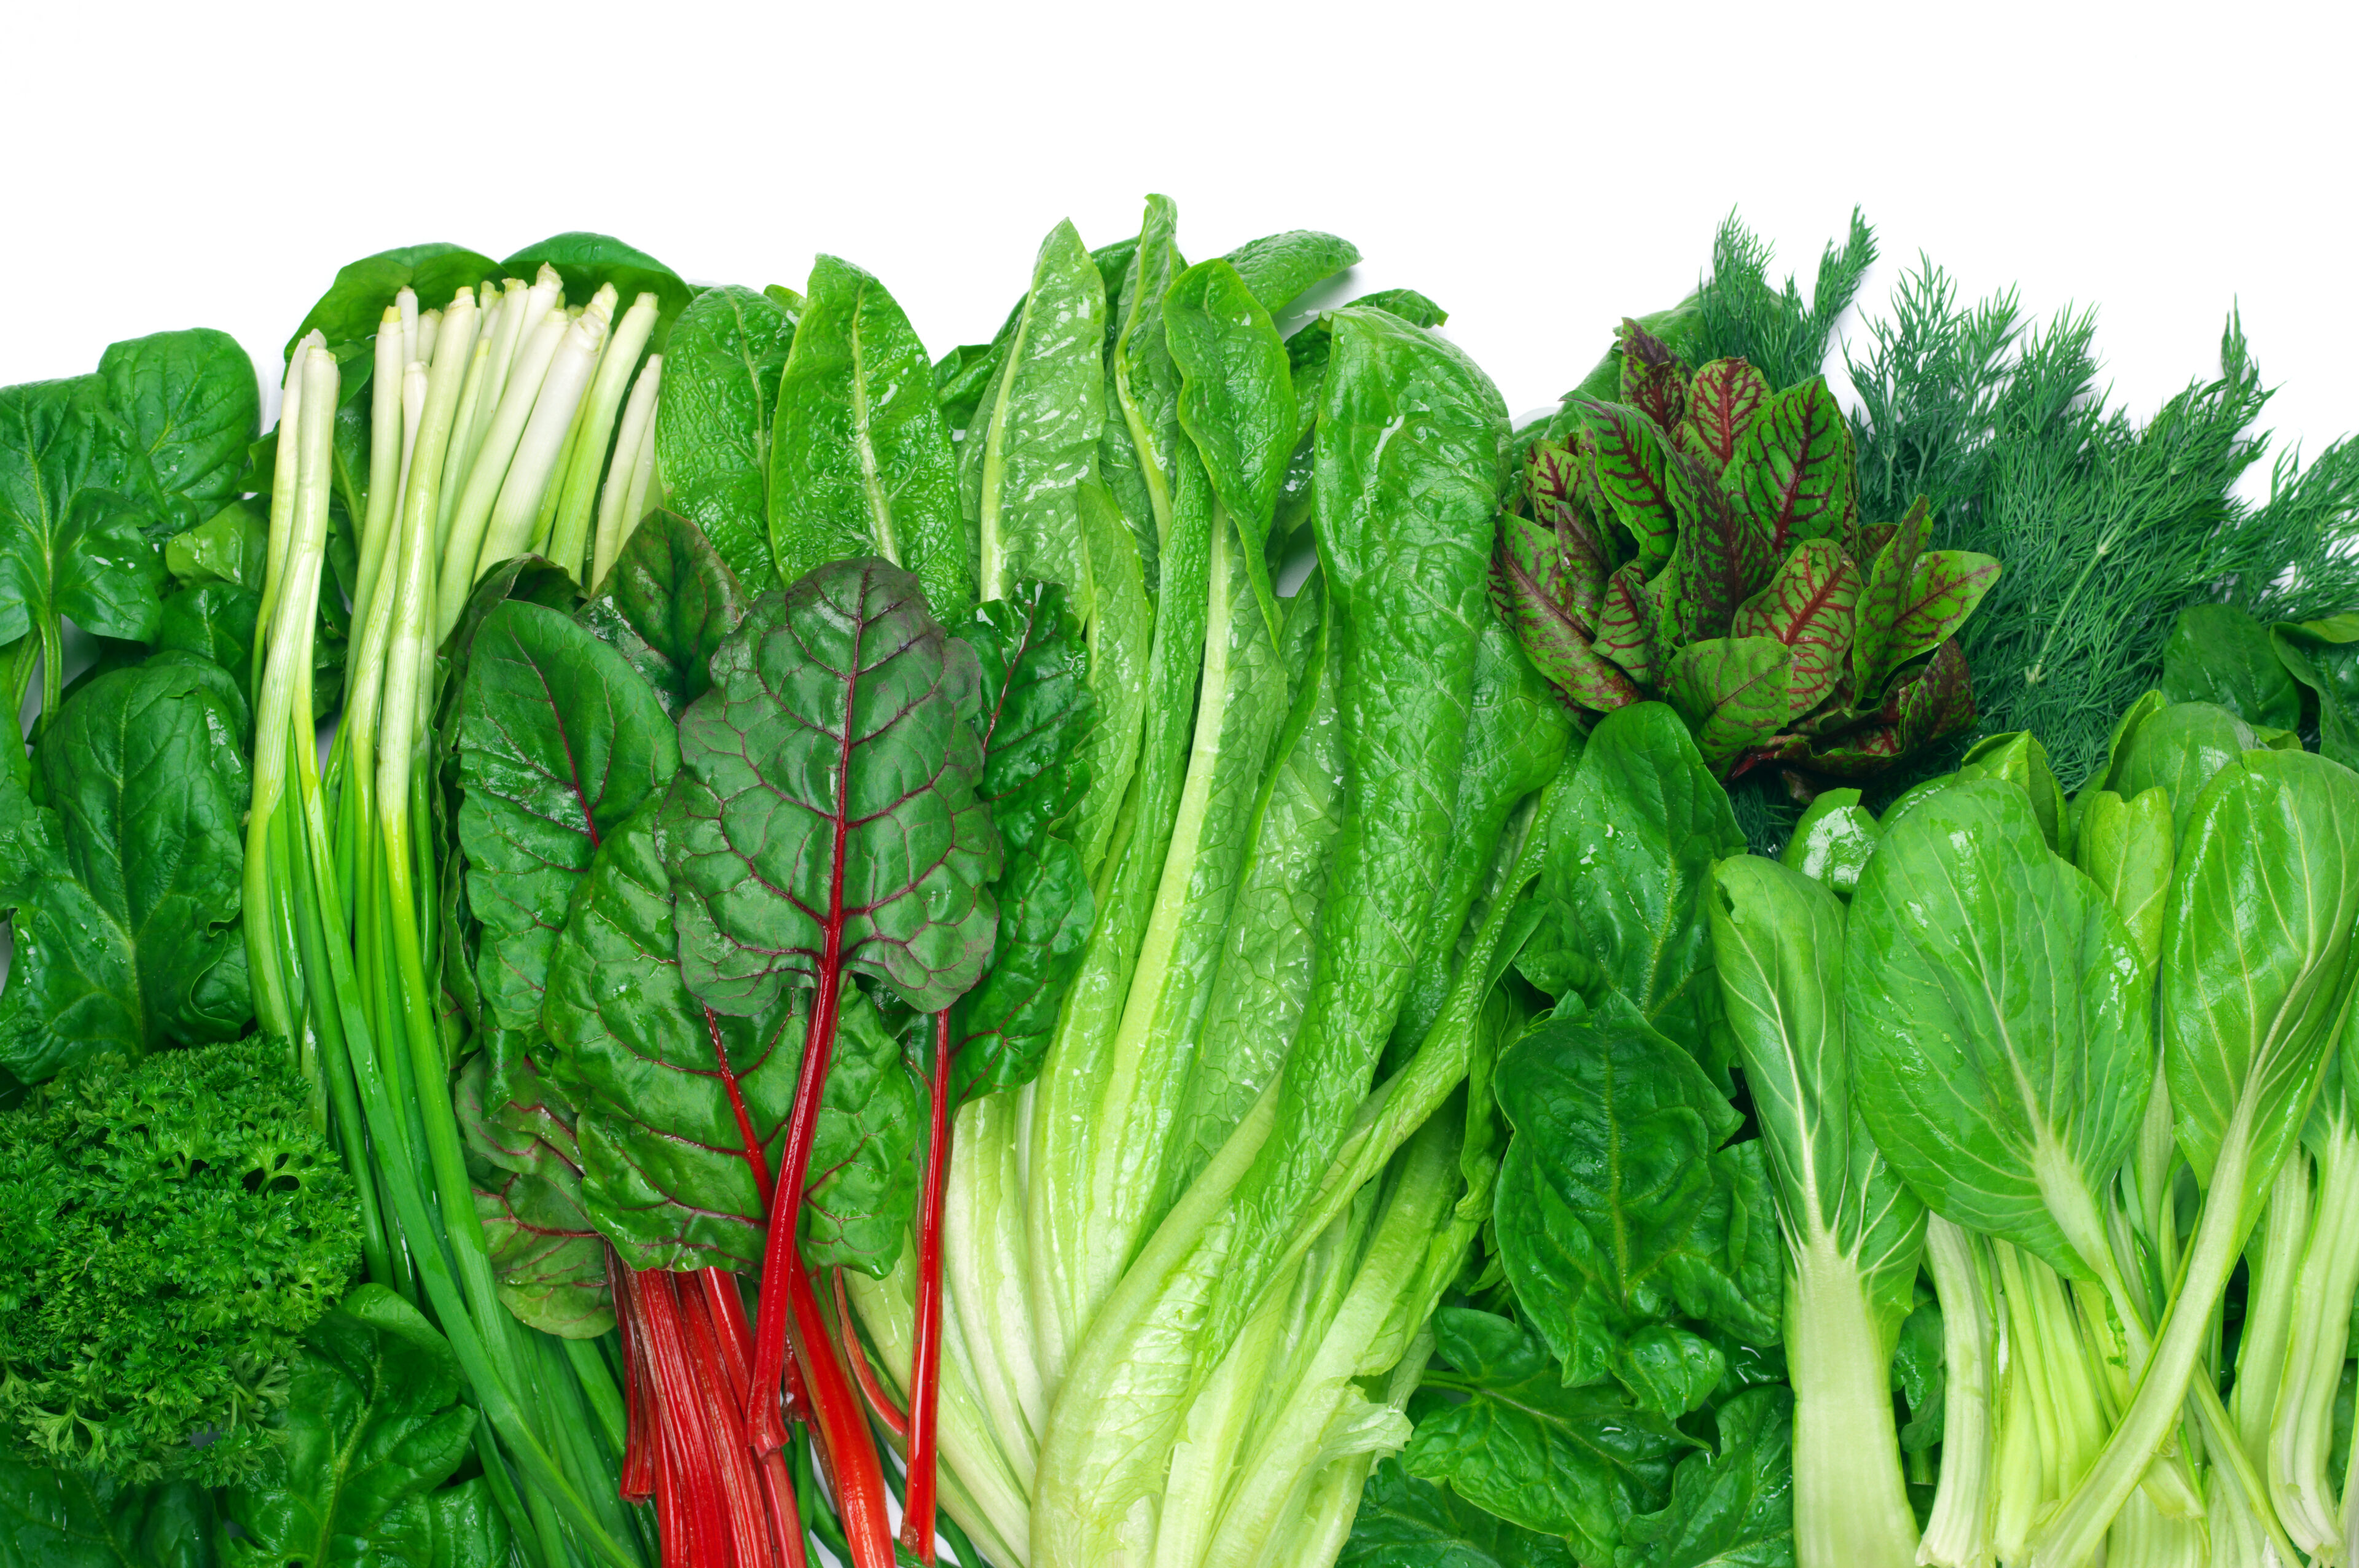 Various green leafy vegetables in a row on a white background